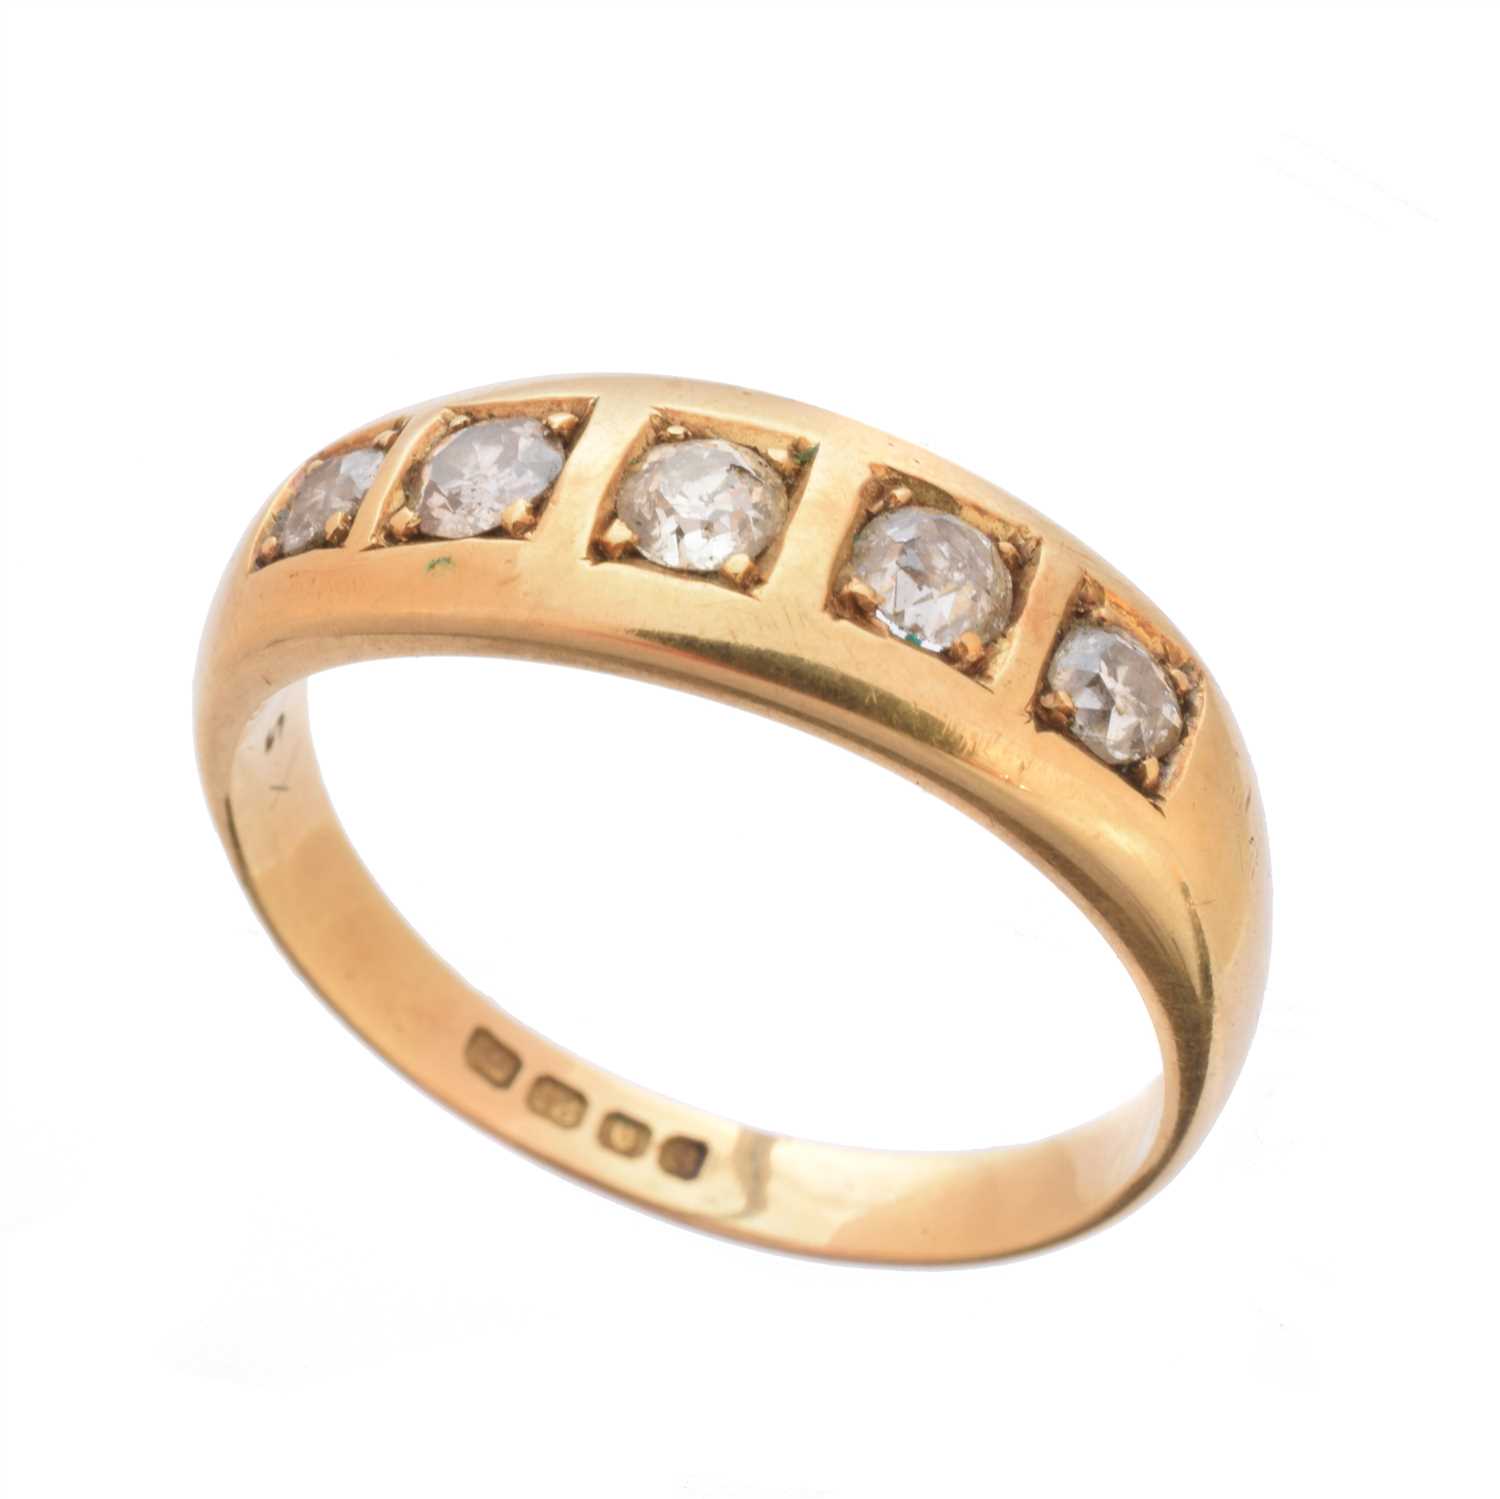 Lot 248 - An early 20th Century 18ct gold diamond five stone ring